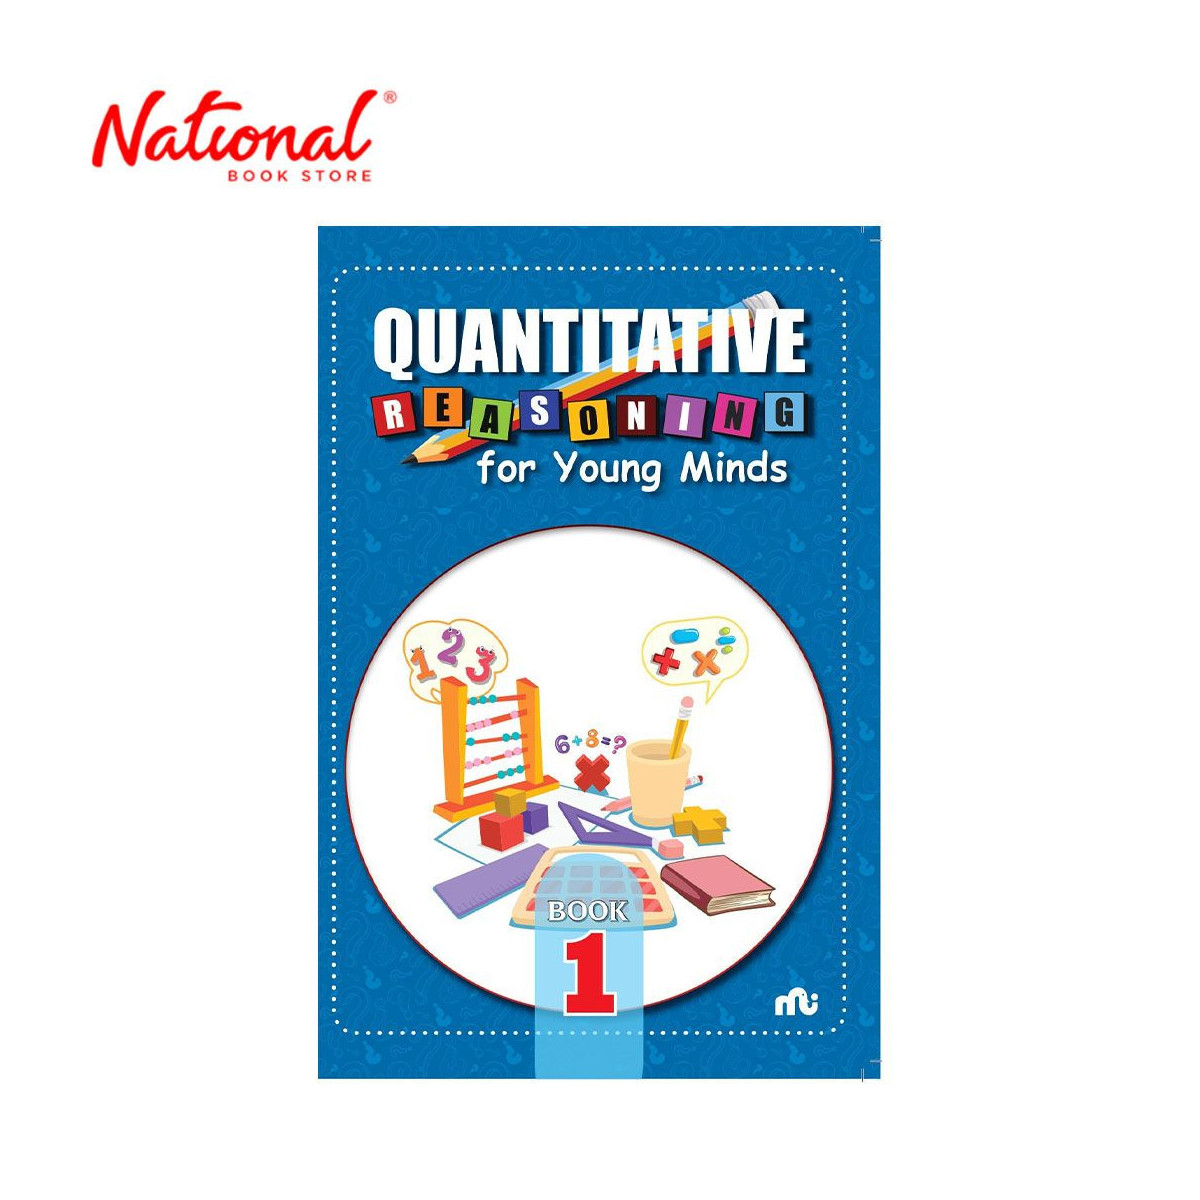 Quantitative Reasoning for Young Minds Book 1 - Trade Paperback - Workbooks for Kids